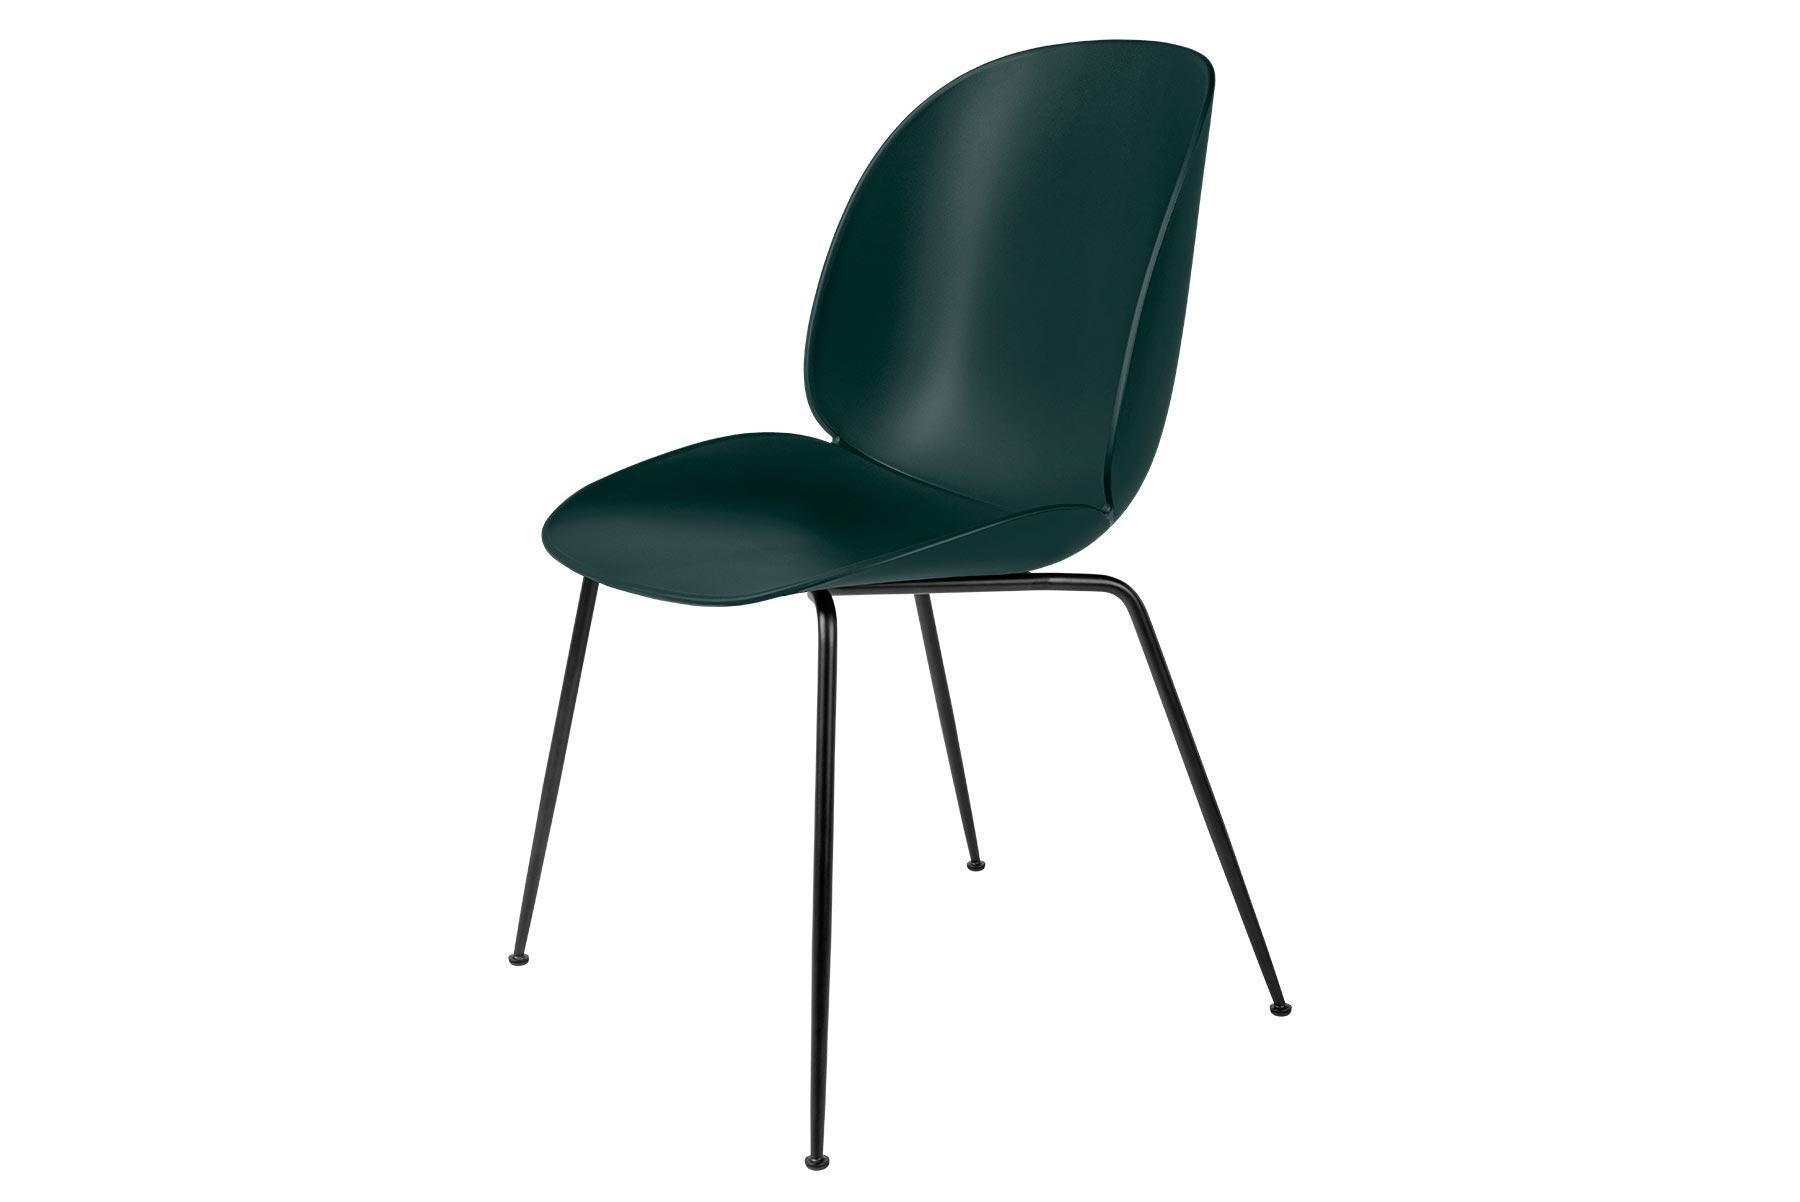 With the introduction of the un-upholstered Beetle chair, the collection has bloomed into a chair series with unlimited possibilities. The Beetle chair is no longer only an upholstered chair but also available with a polypropylene plastic shell,